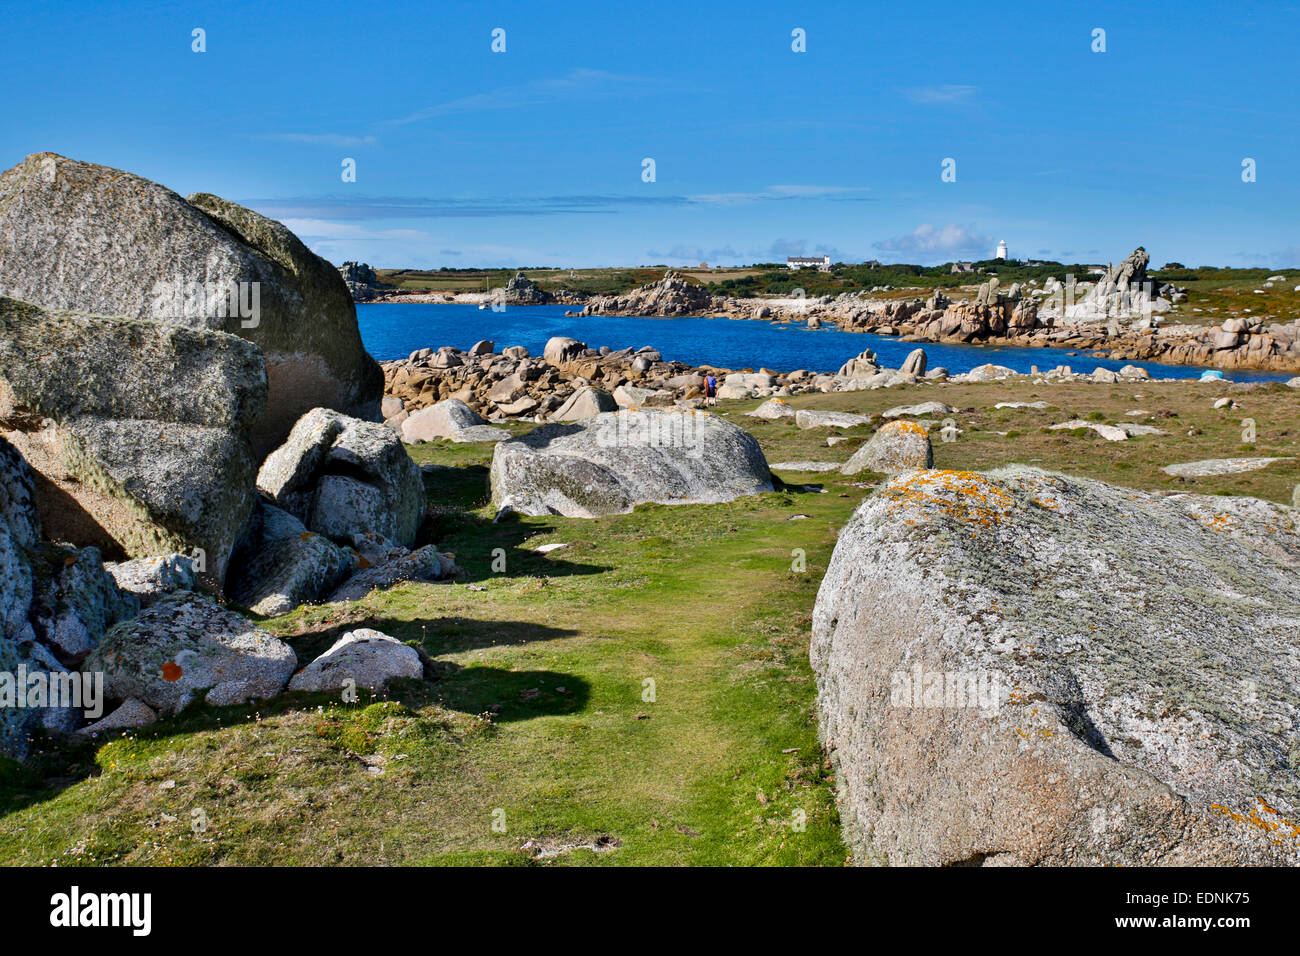 St Agnes; Isles of Scilly; UK Stockfoto